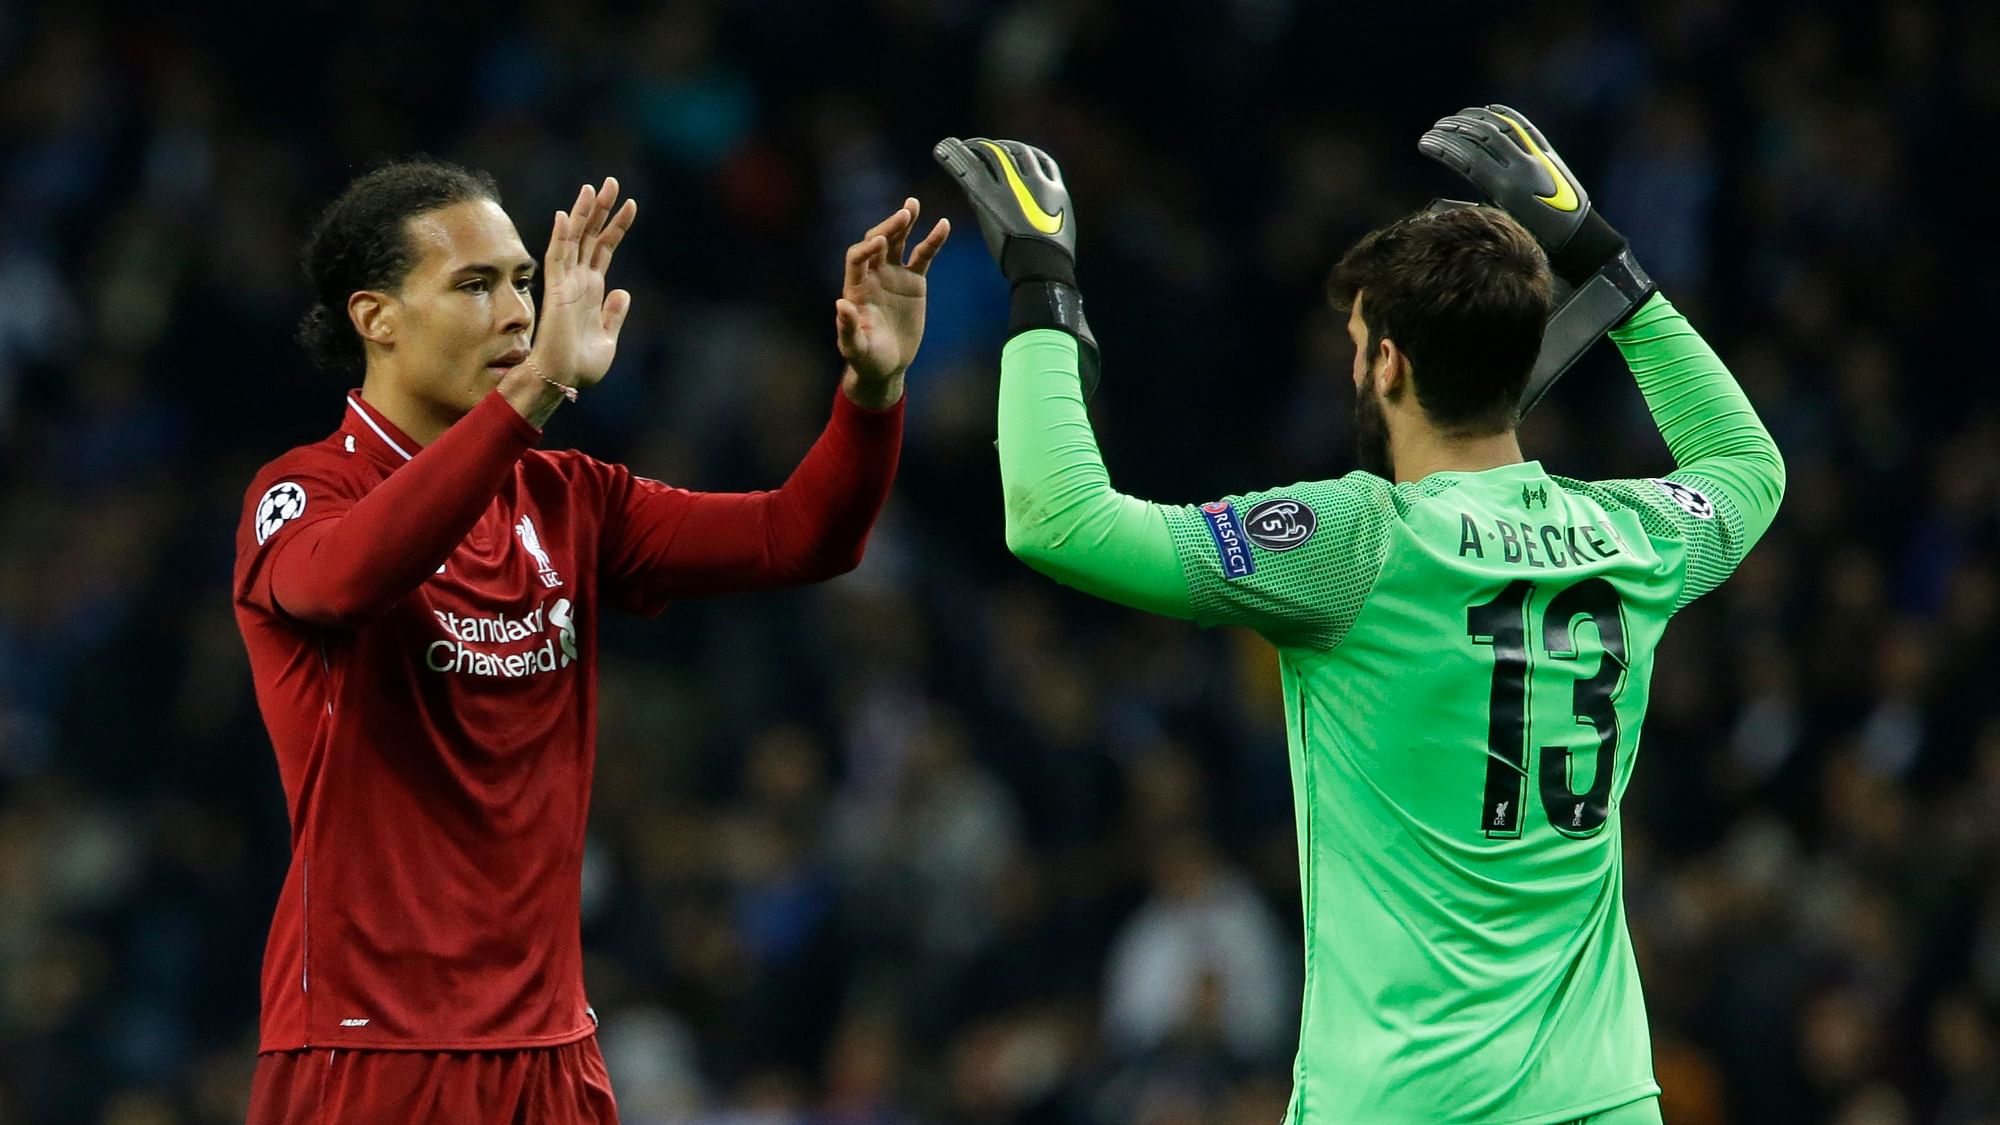 Virgil Van Dijk celebrates with teammate Alison Becker after a win during the UEFA Champions League.